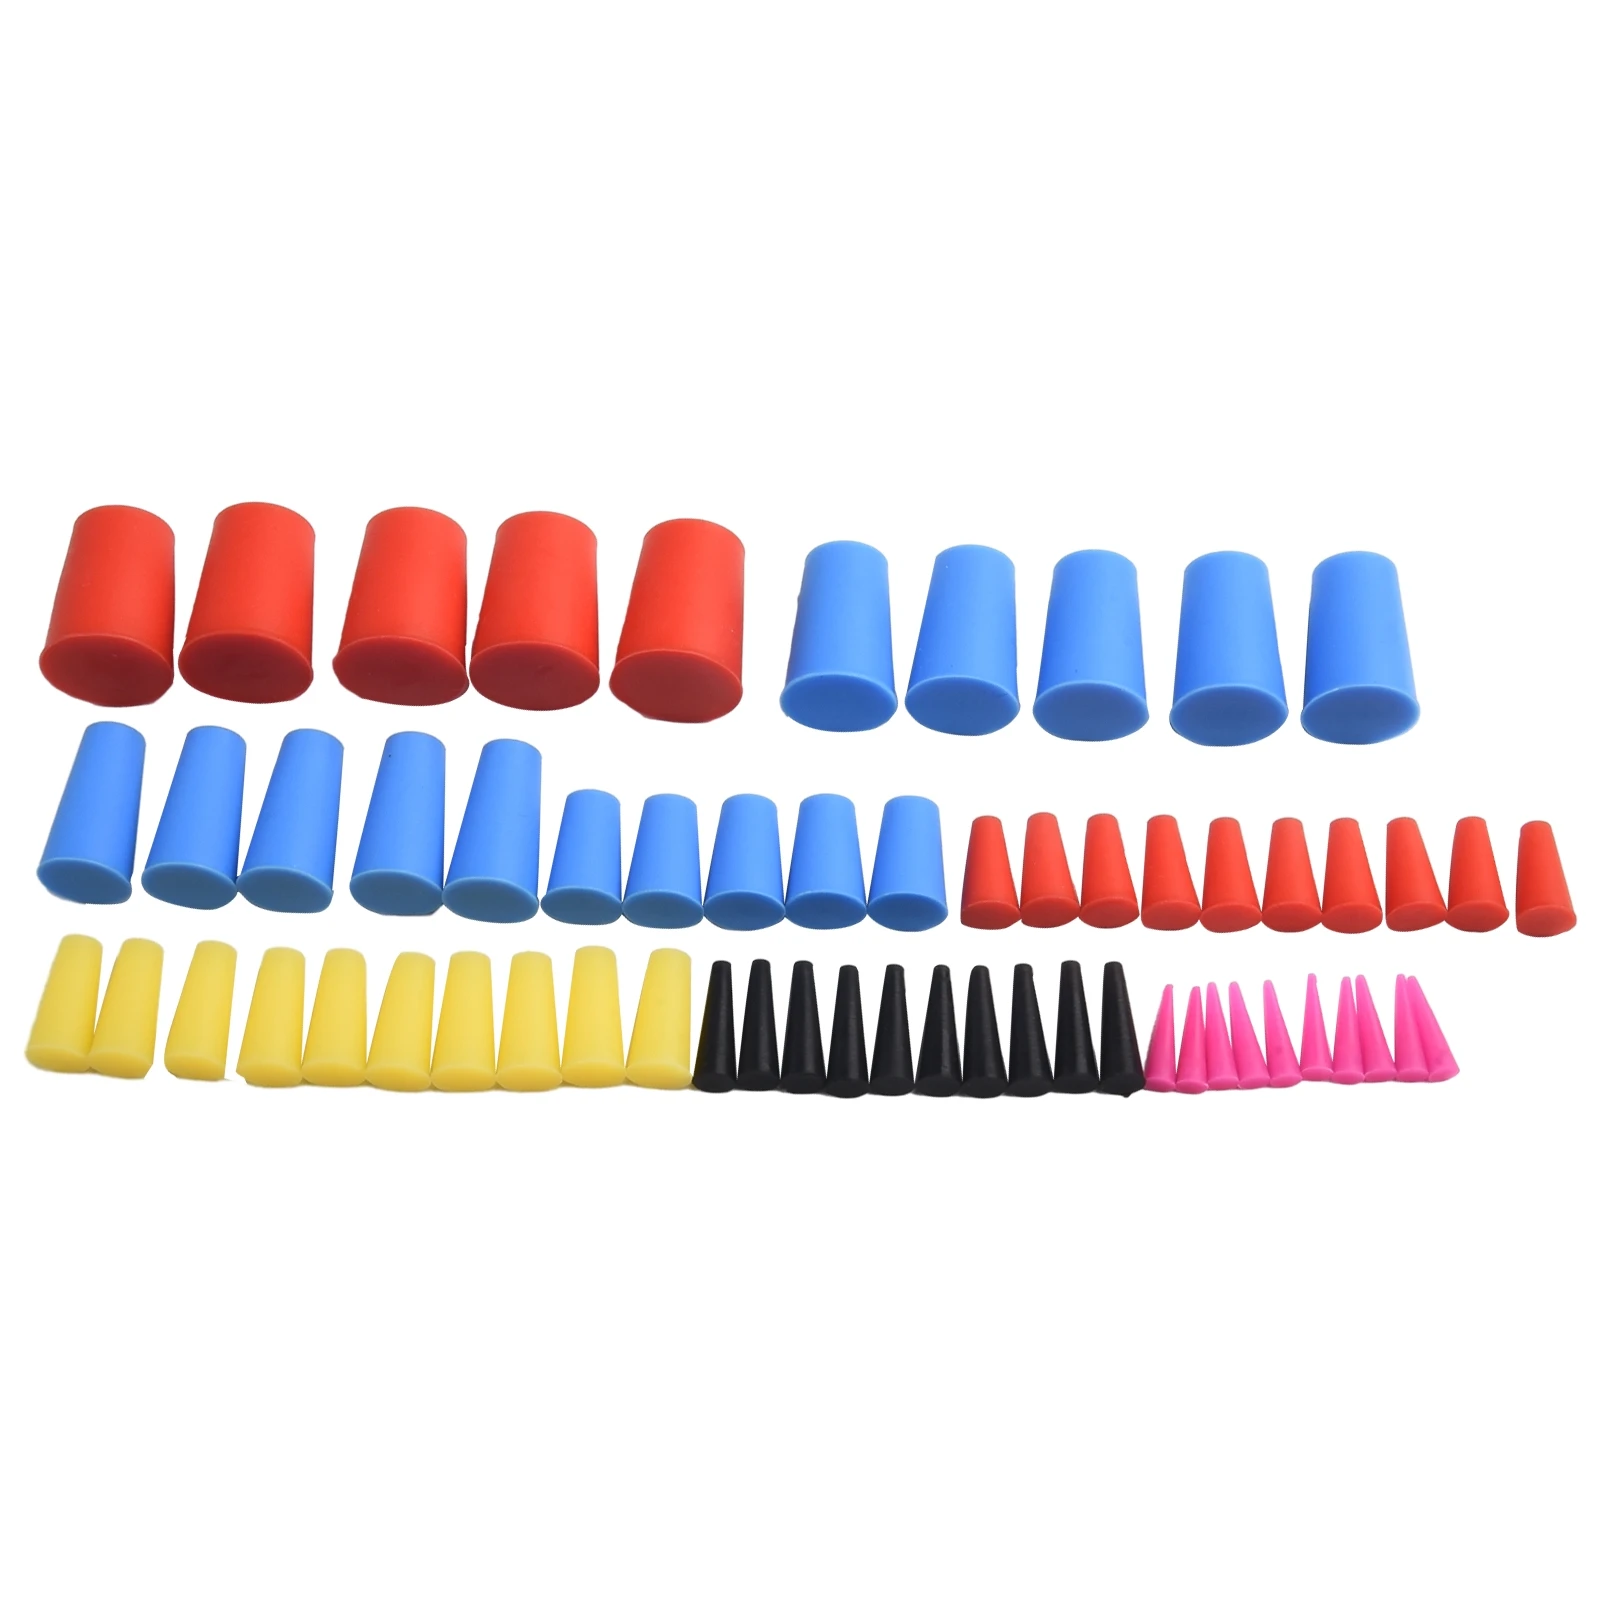 

Cone Plugs Silicone Cone Plugs Accessories Assortment Kit High Temp Masking Plugs Parts Powder Coating Replacement